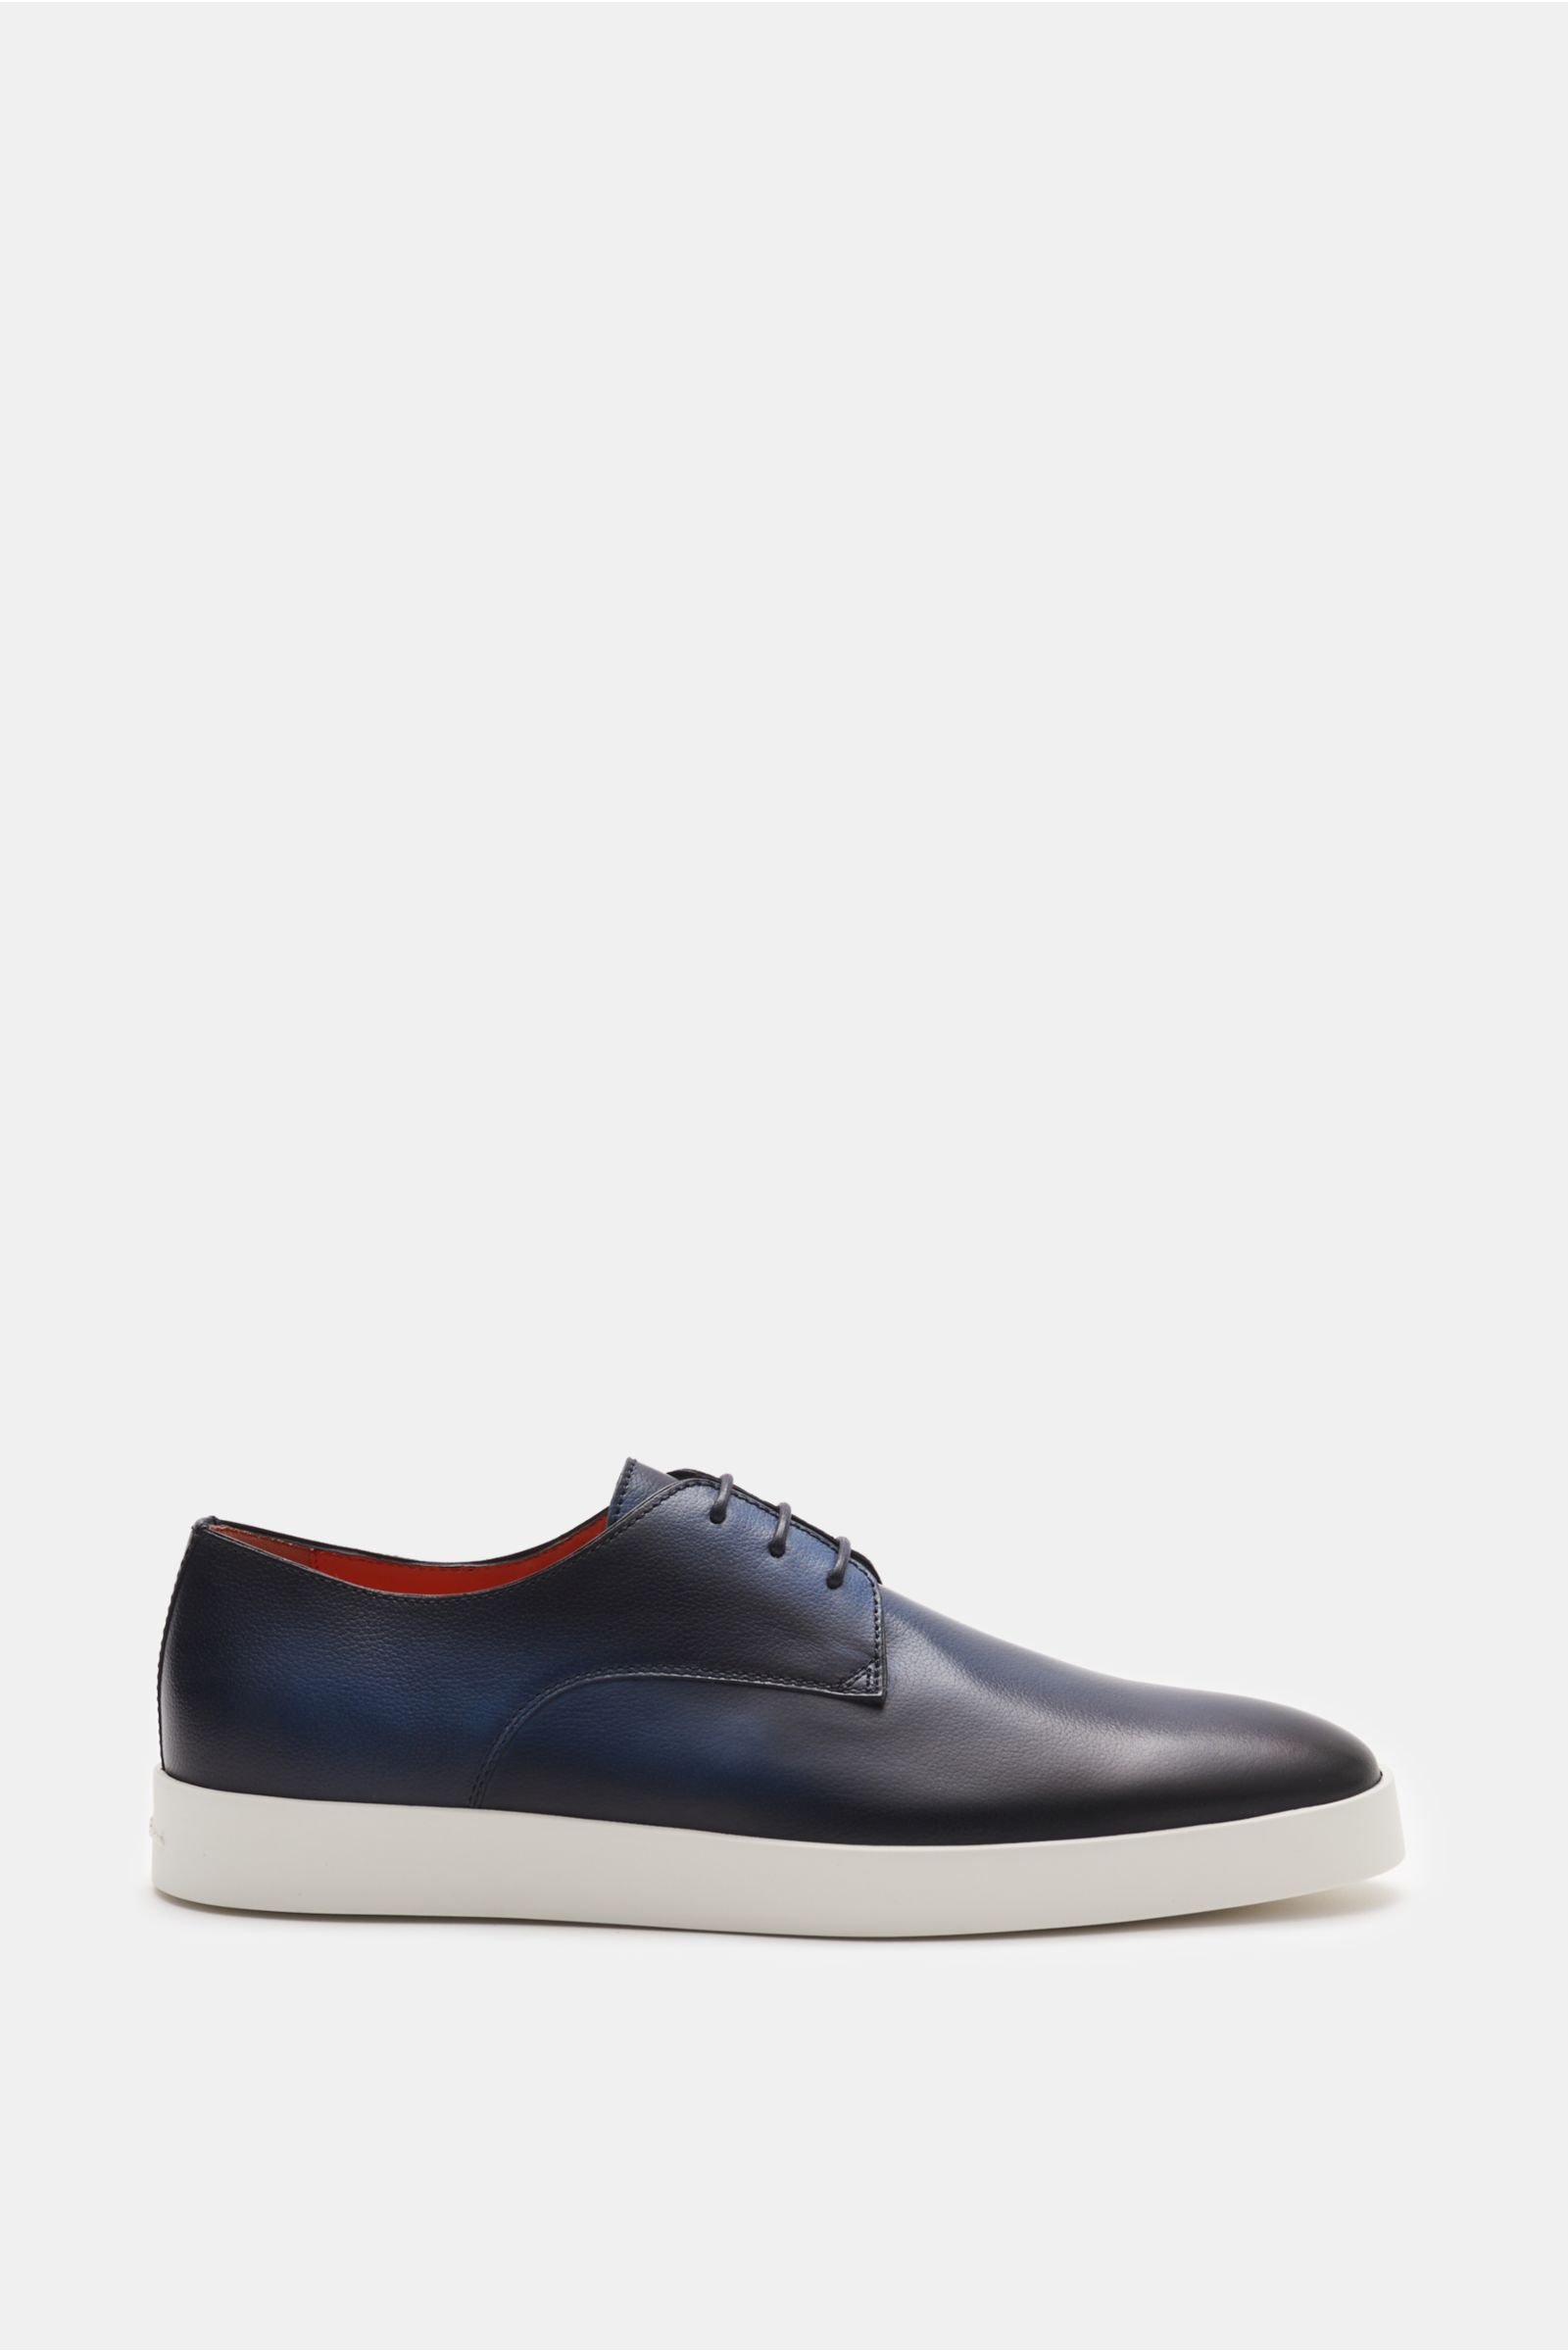 Derby shoes navy